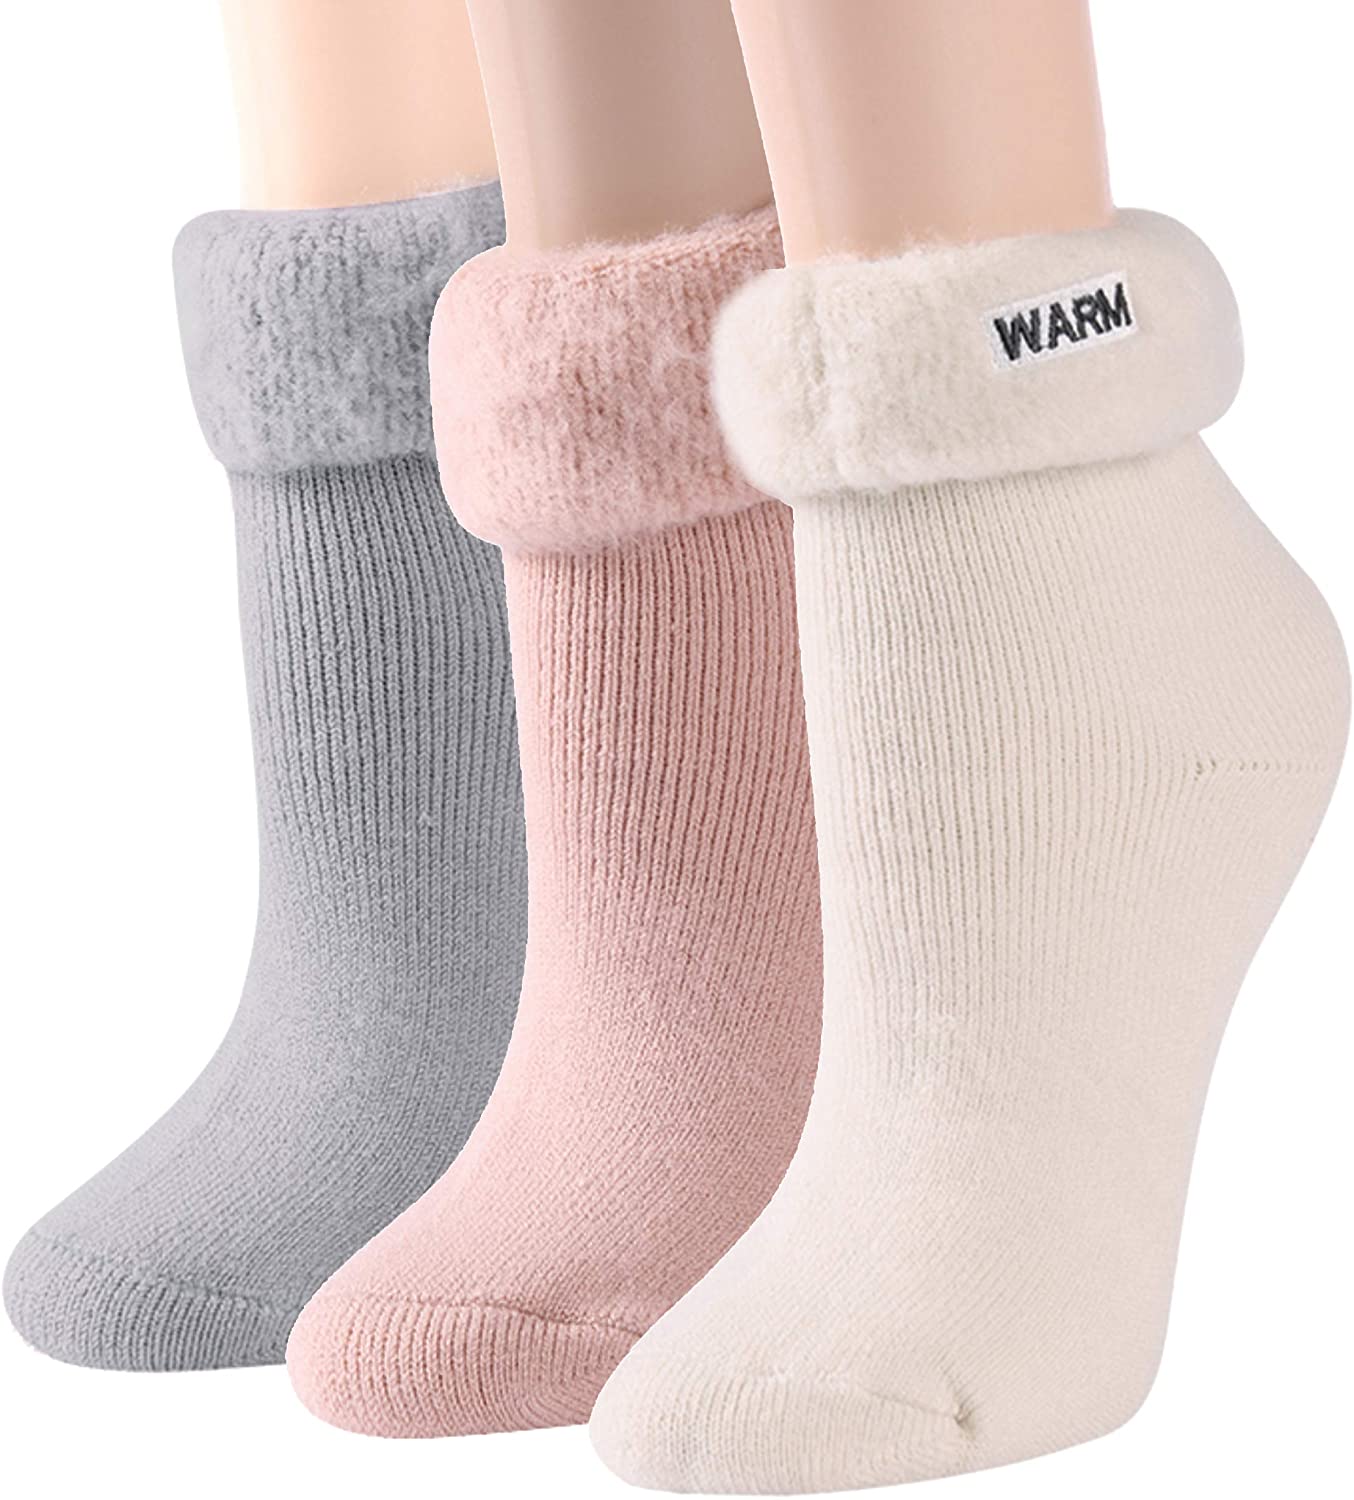 Womens Thermal Socks Hissox Soft Warm Winter Crew Socks Lined Insulated Thick Heat Socks For Cold Weather